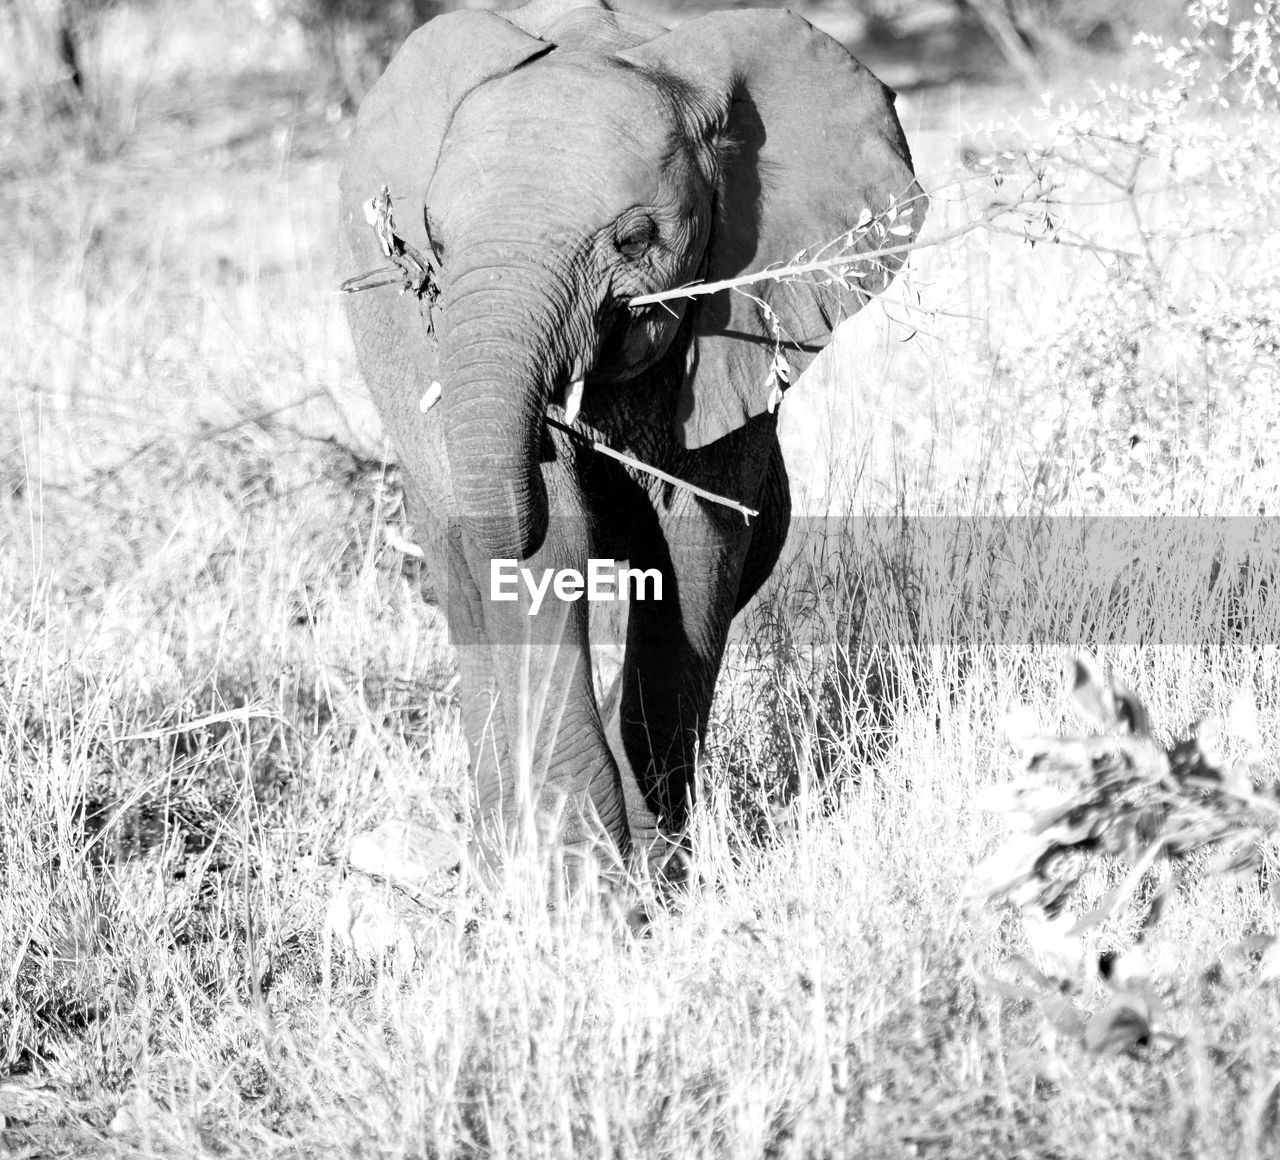 CLOSE-UP OF ELEPHANT IN A FIELD